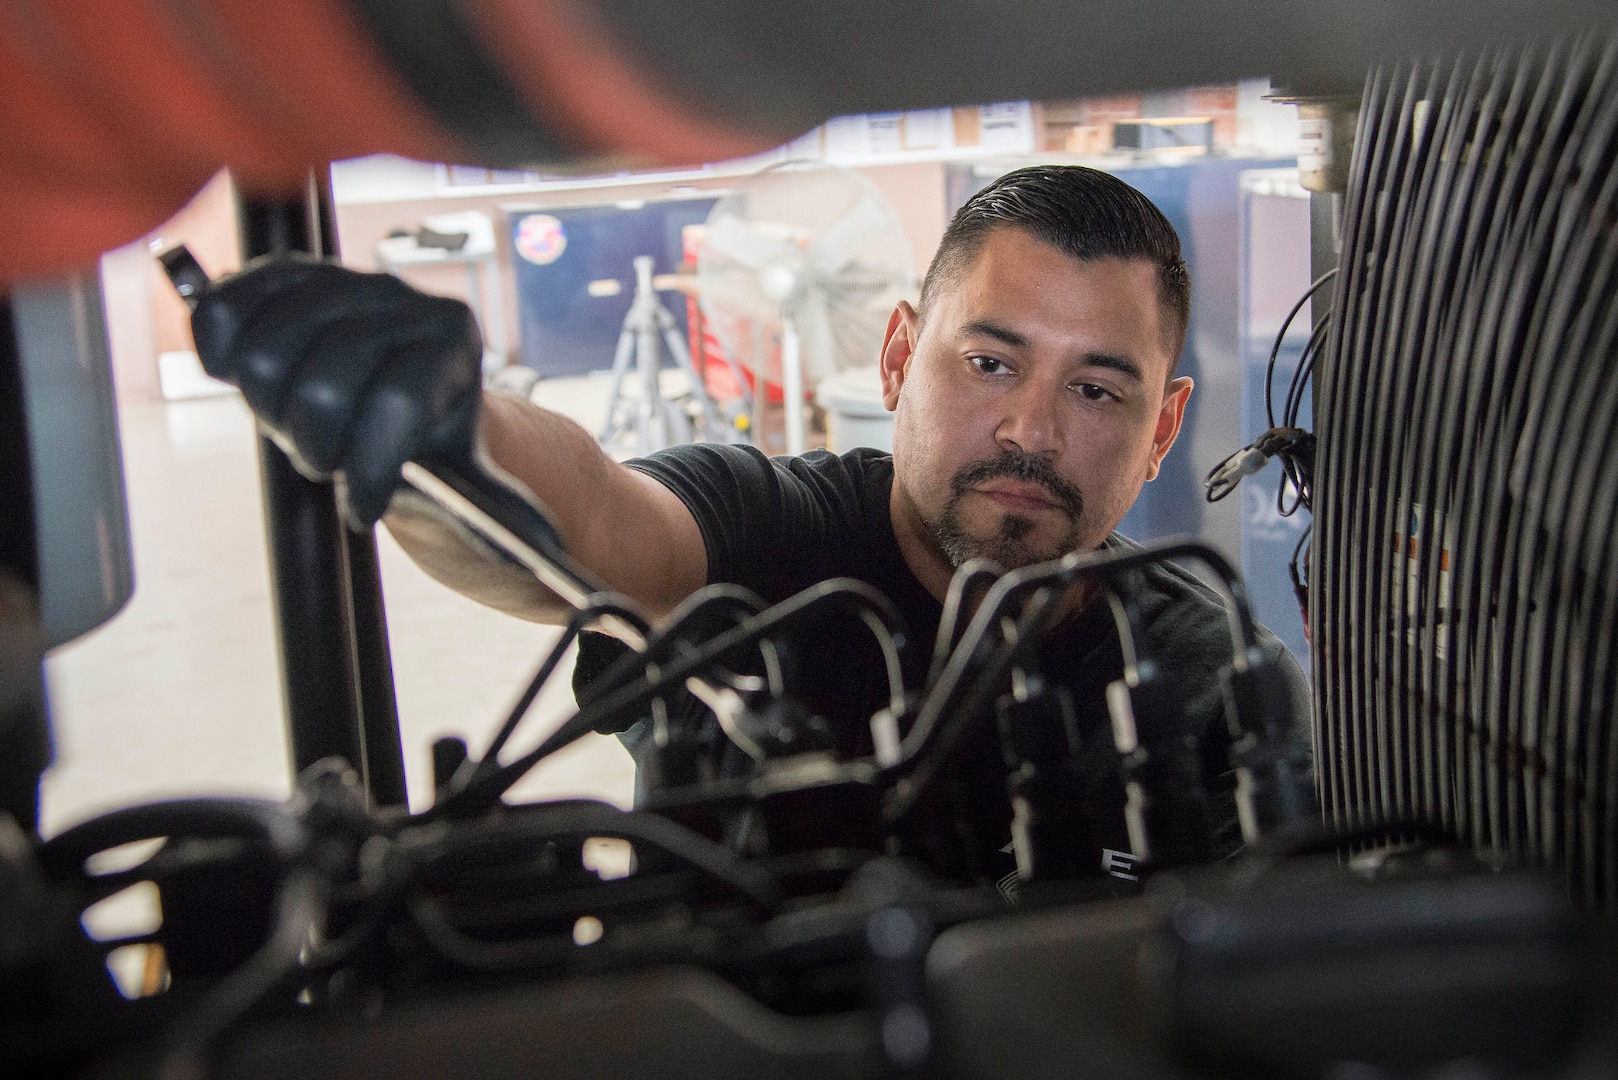 Zenon Torres, 12th Flying Training Wing aerospace ground equipment mechanic, performs routine maintenance on a MC-6 air compressor Aug. 28, 2018, at Joint Base San Antonio-Randolph, Texas. Torres is part of a team that inspects, tests and maintains ground equipment that supports aircraft maintenance and flying training operations.